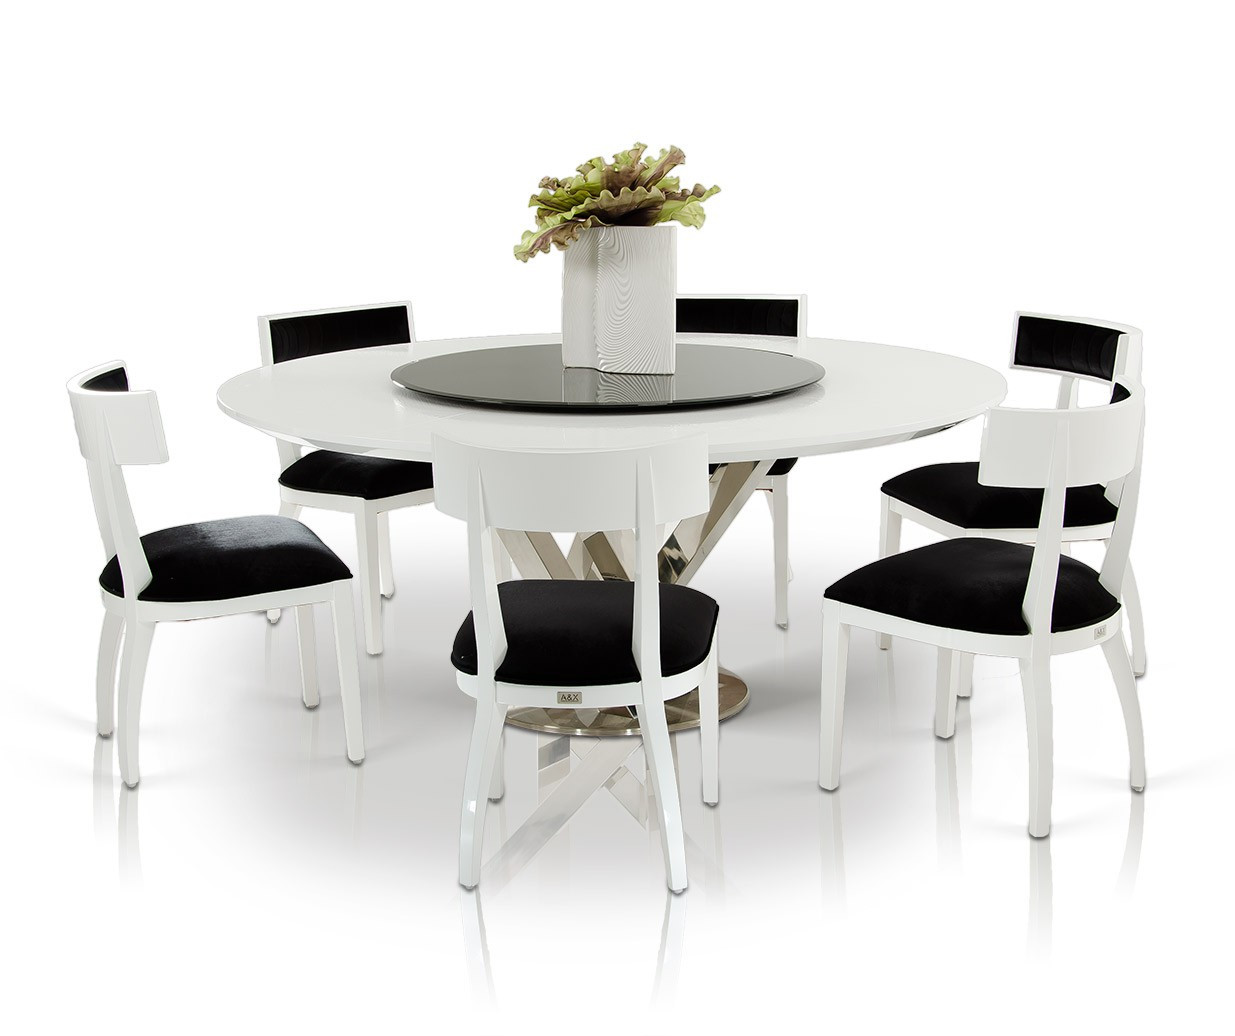 Kitchen Tables Modern
 A&X Spiral Modern Round White Dining Table with Lazy Susan